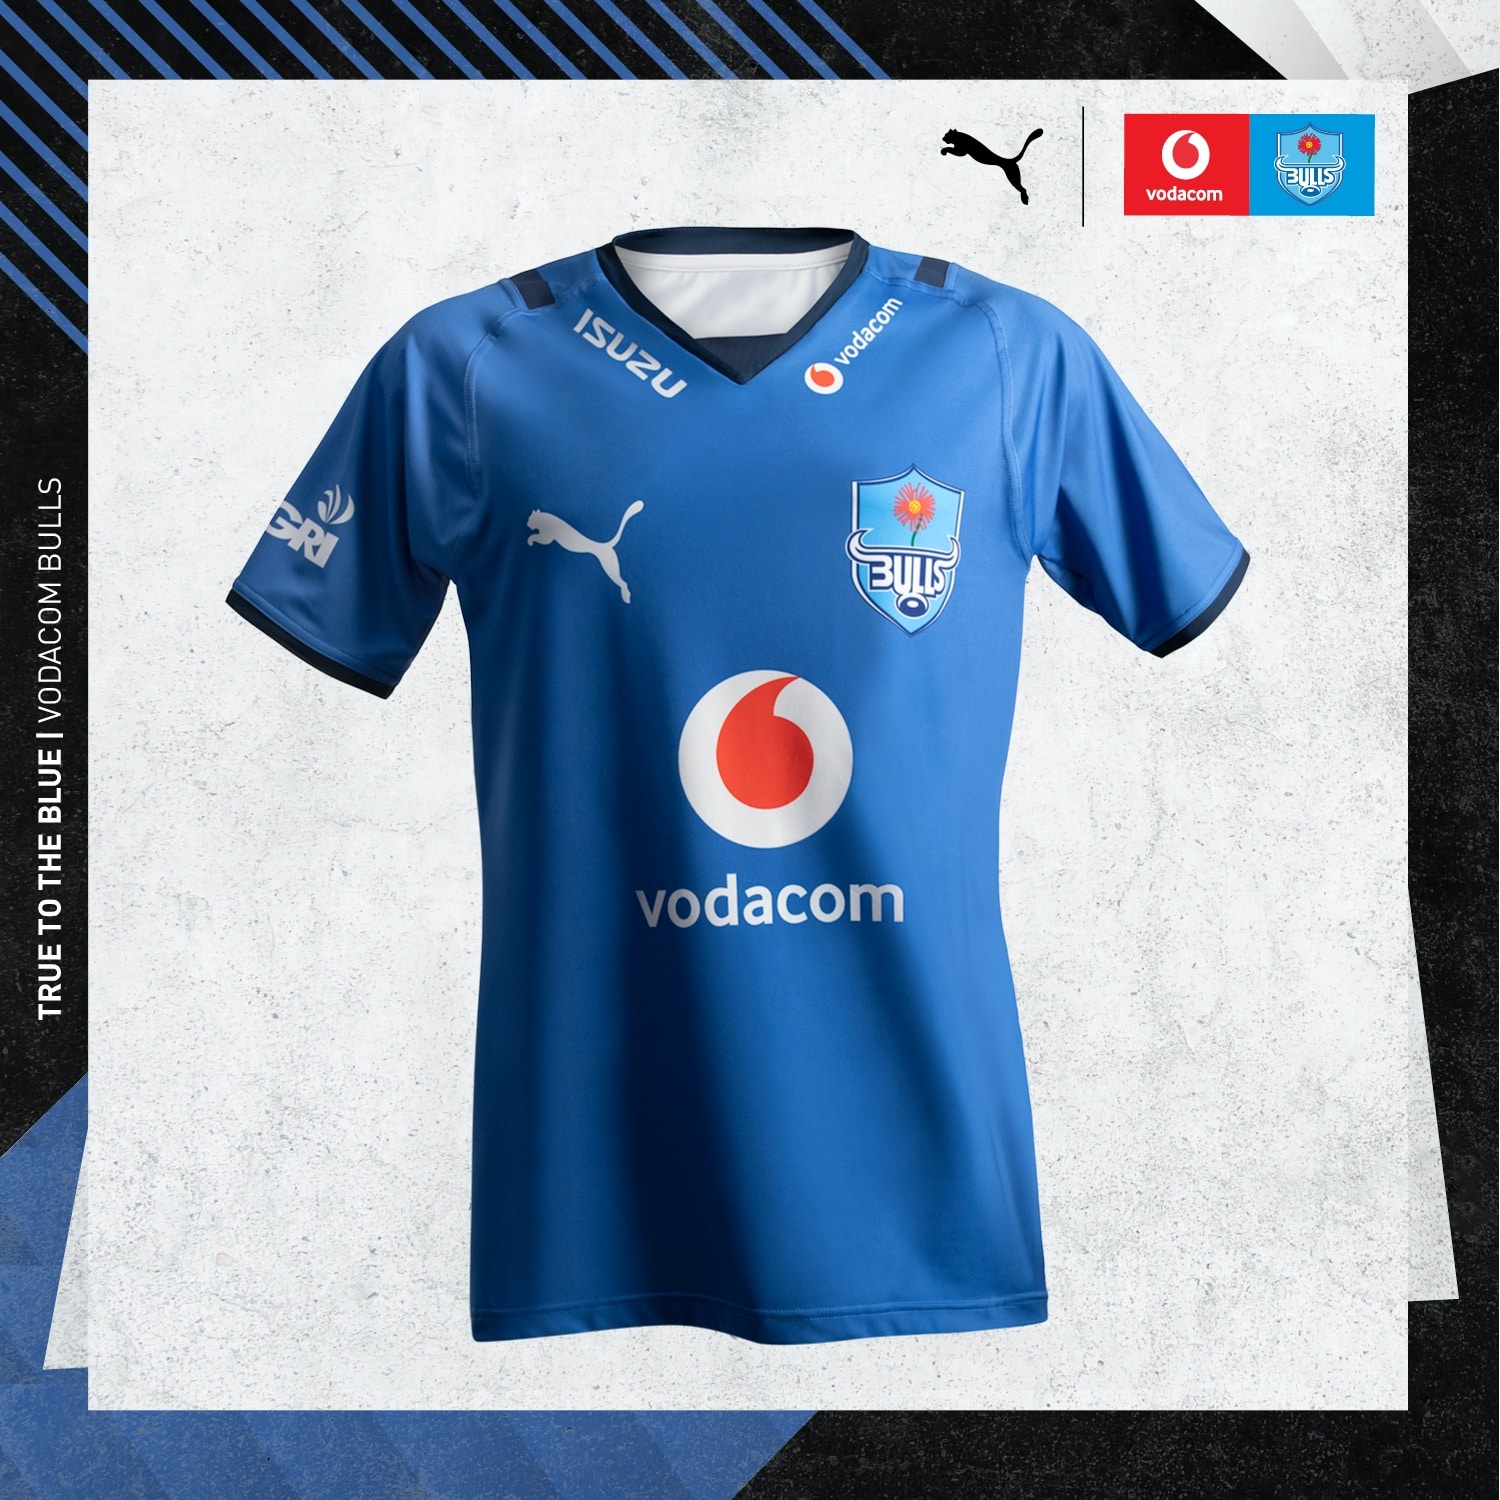 You are currently viewing Puma launch new Bulls kit